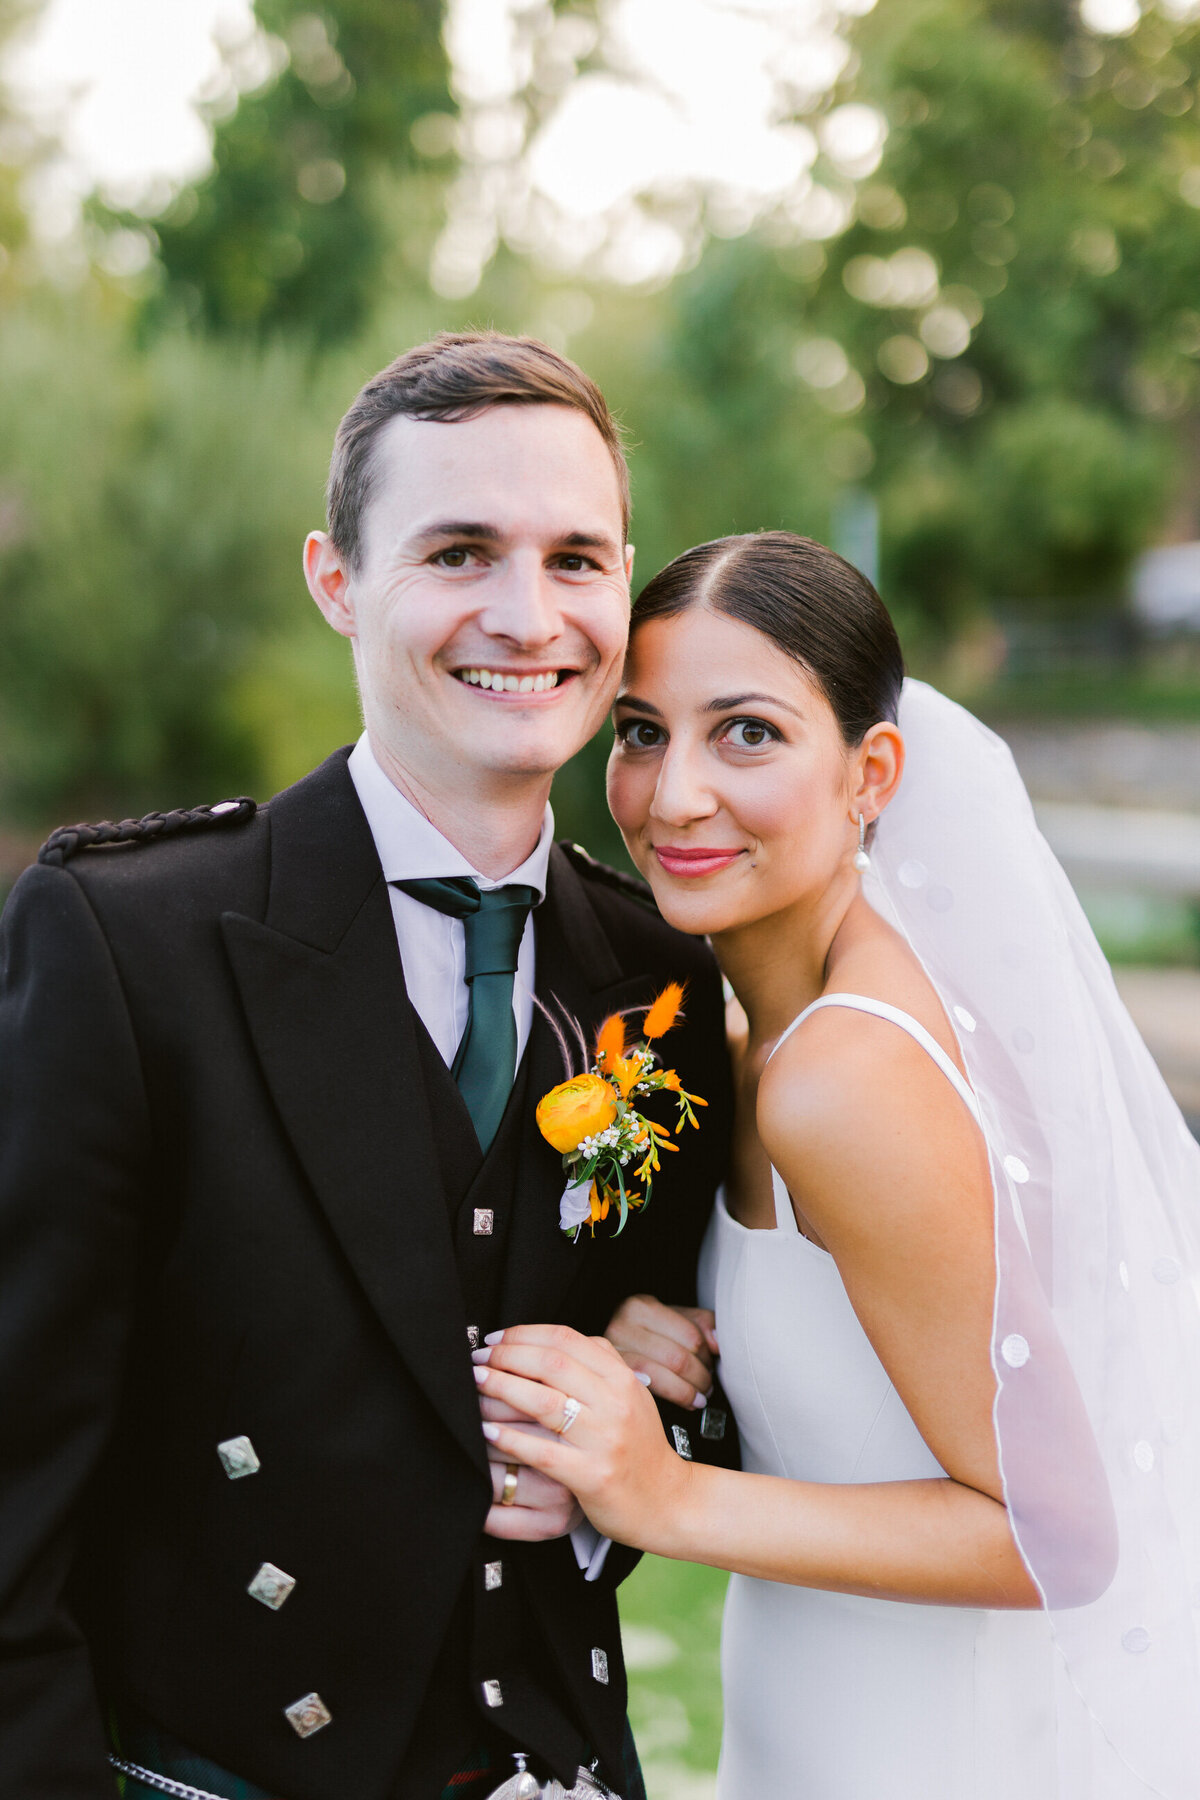 Angelica Marie Photography_Natalie Pirzad and Gordon Stewart Wedding_September 2022_The Lodge at Malibou Lake Wedding_Malibu Wedding Photographer_1399